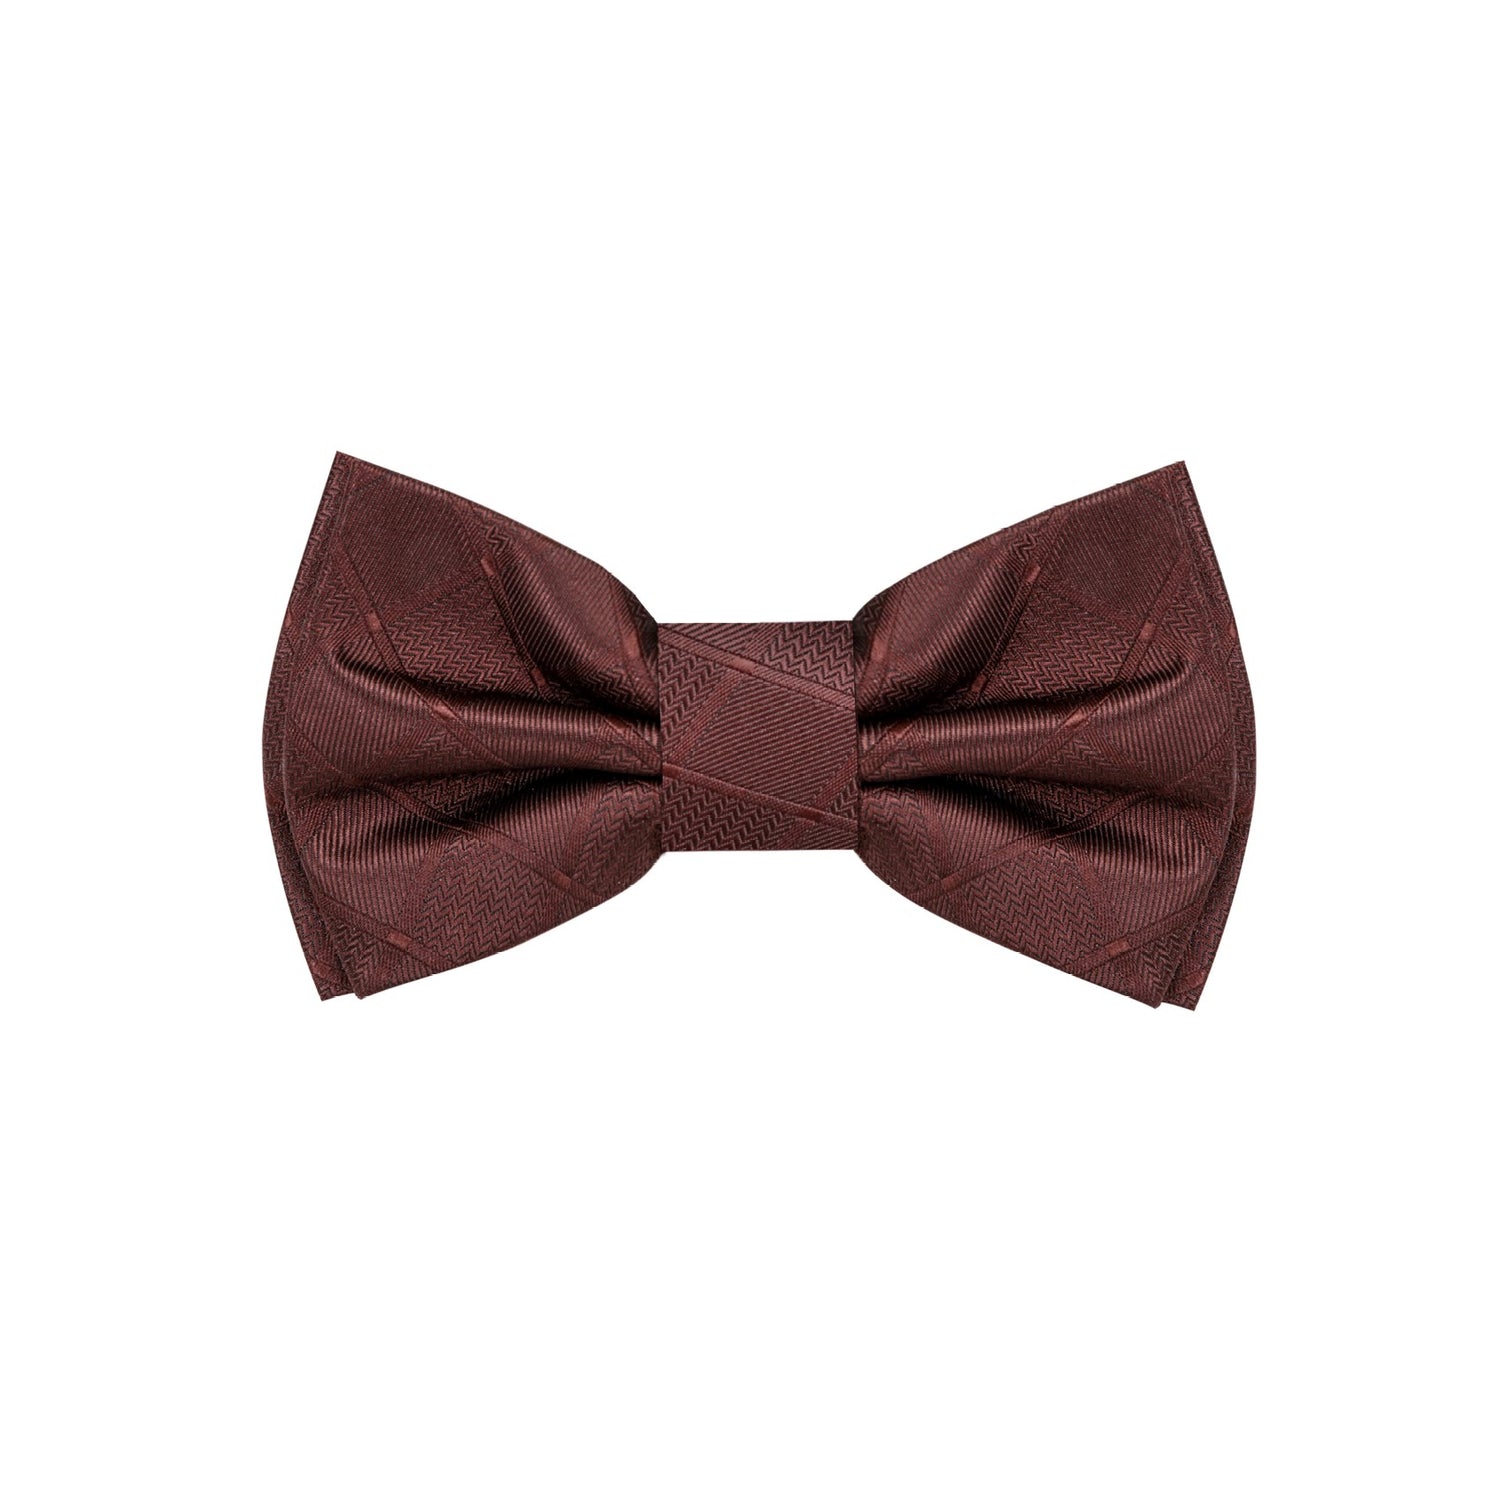 Brown with Geometric Texture Bow Tie